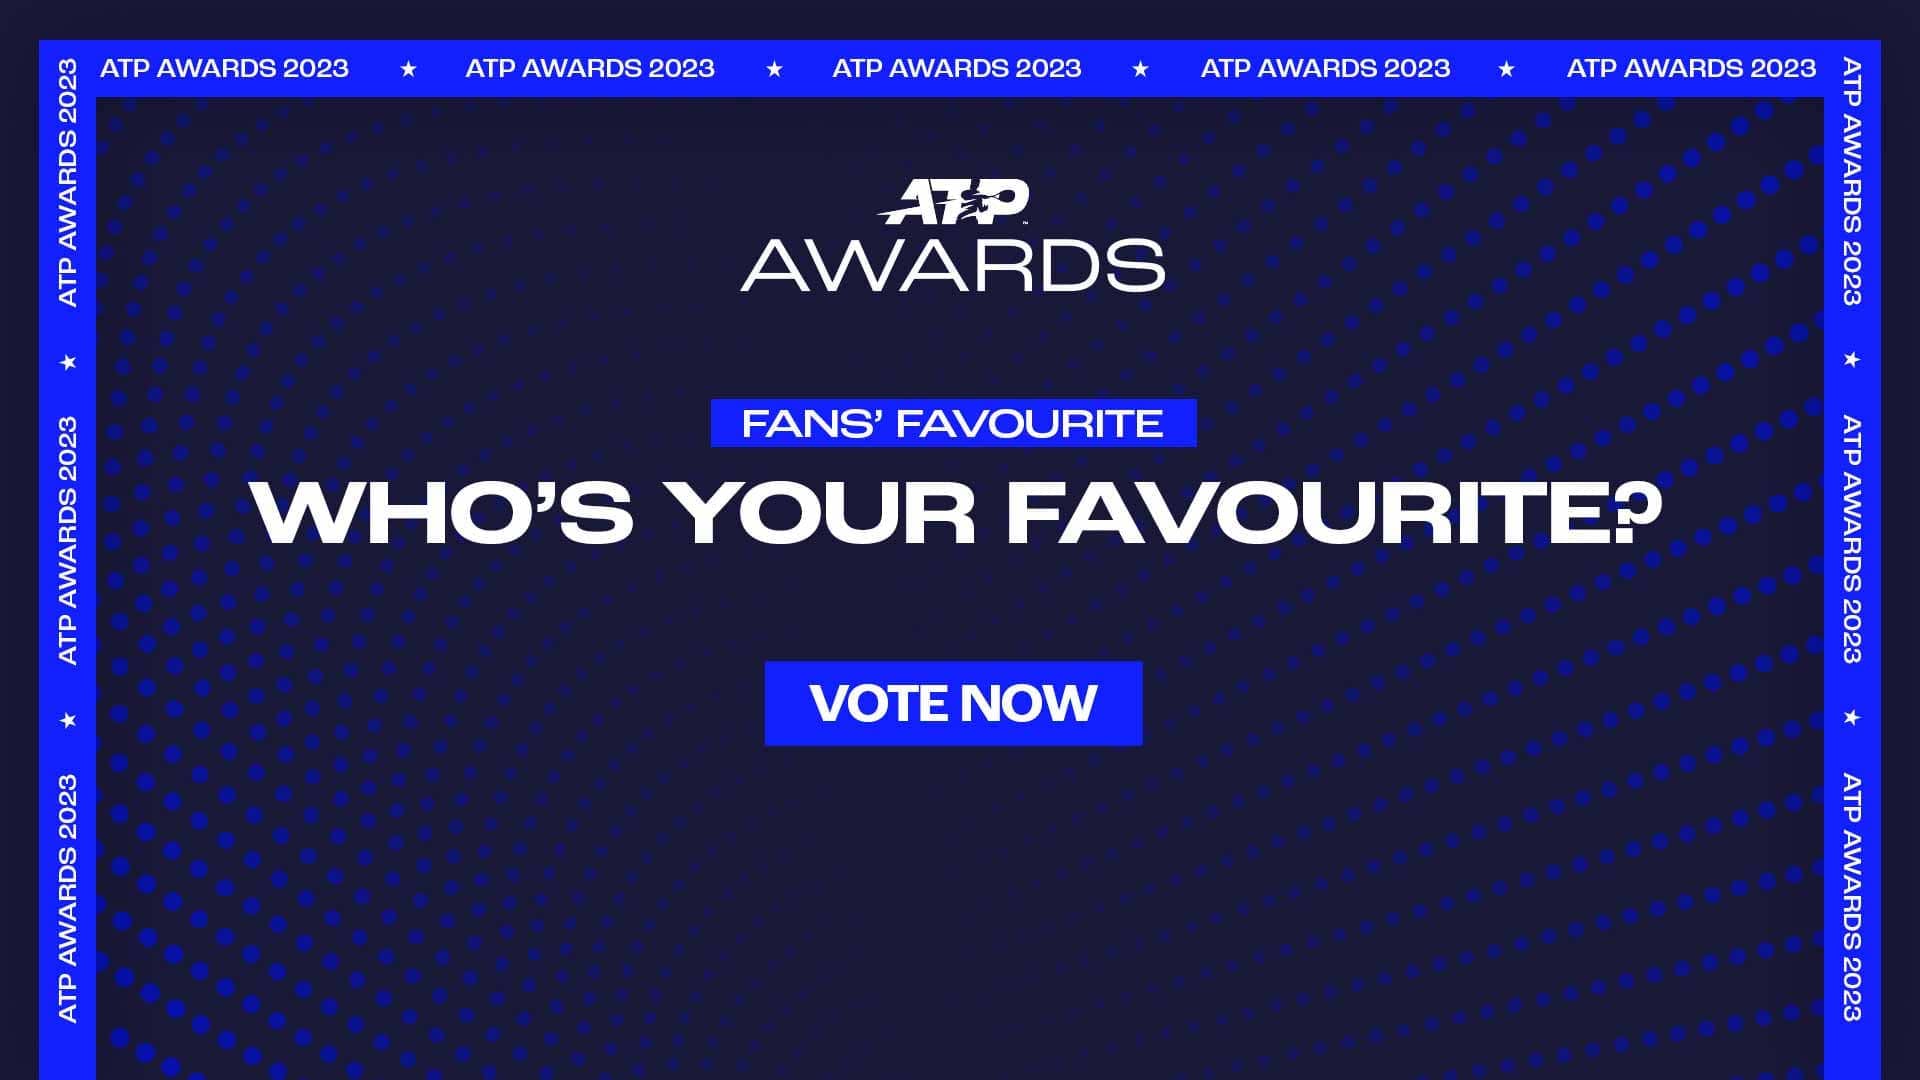 Who's Your Favourite? Vote for your favourite tennis player and doubles team in the 2023 ATP Awards. 